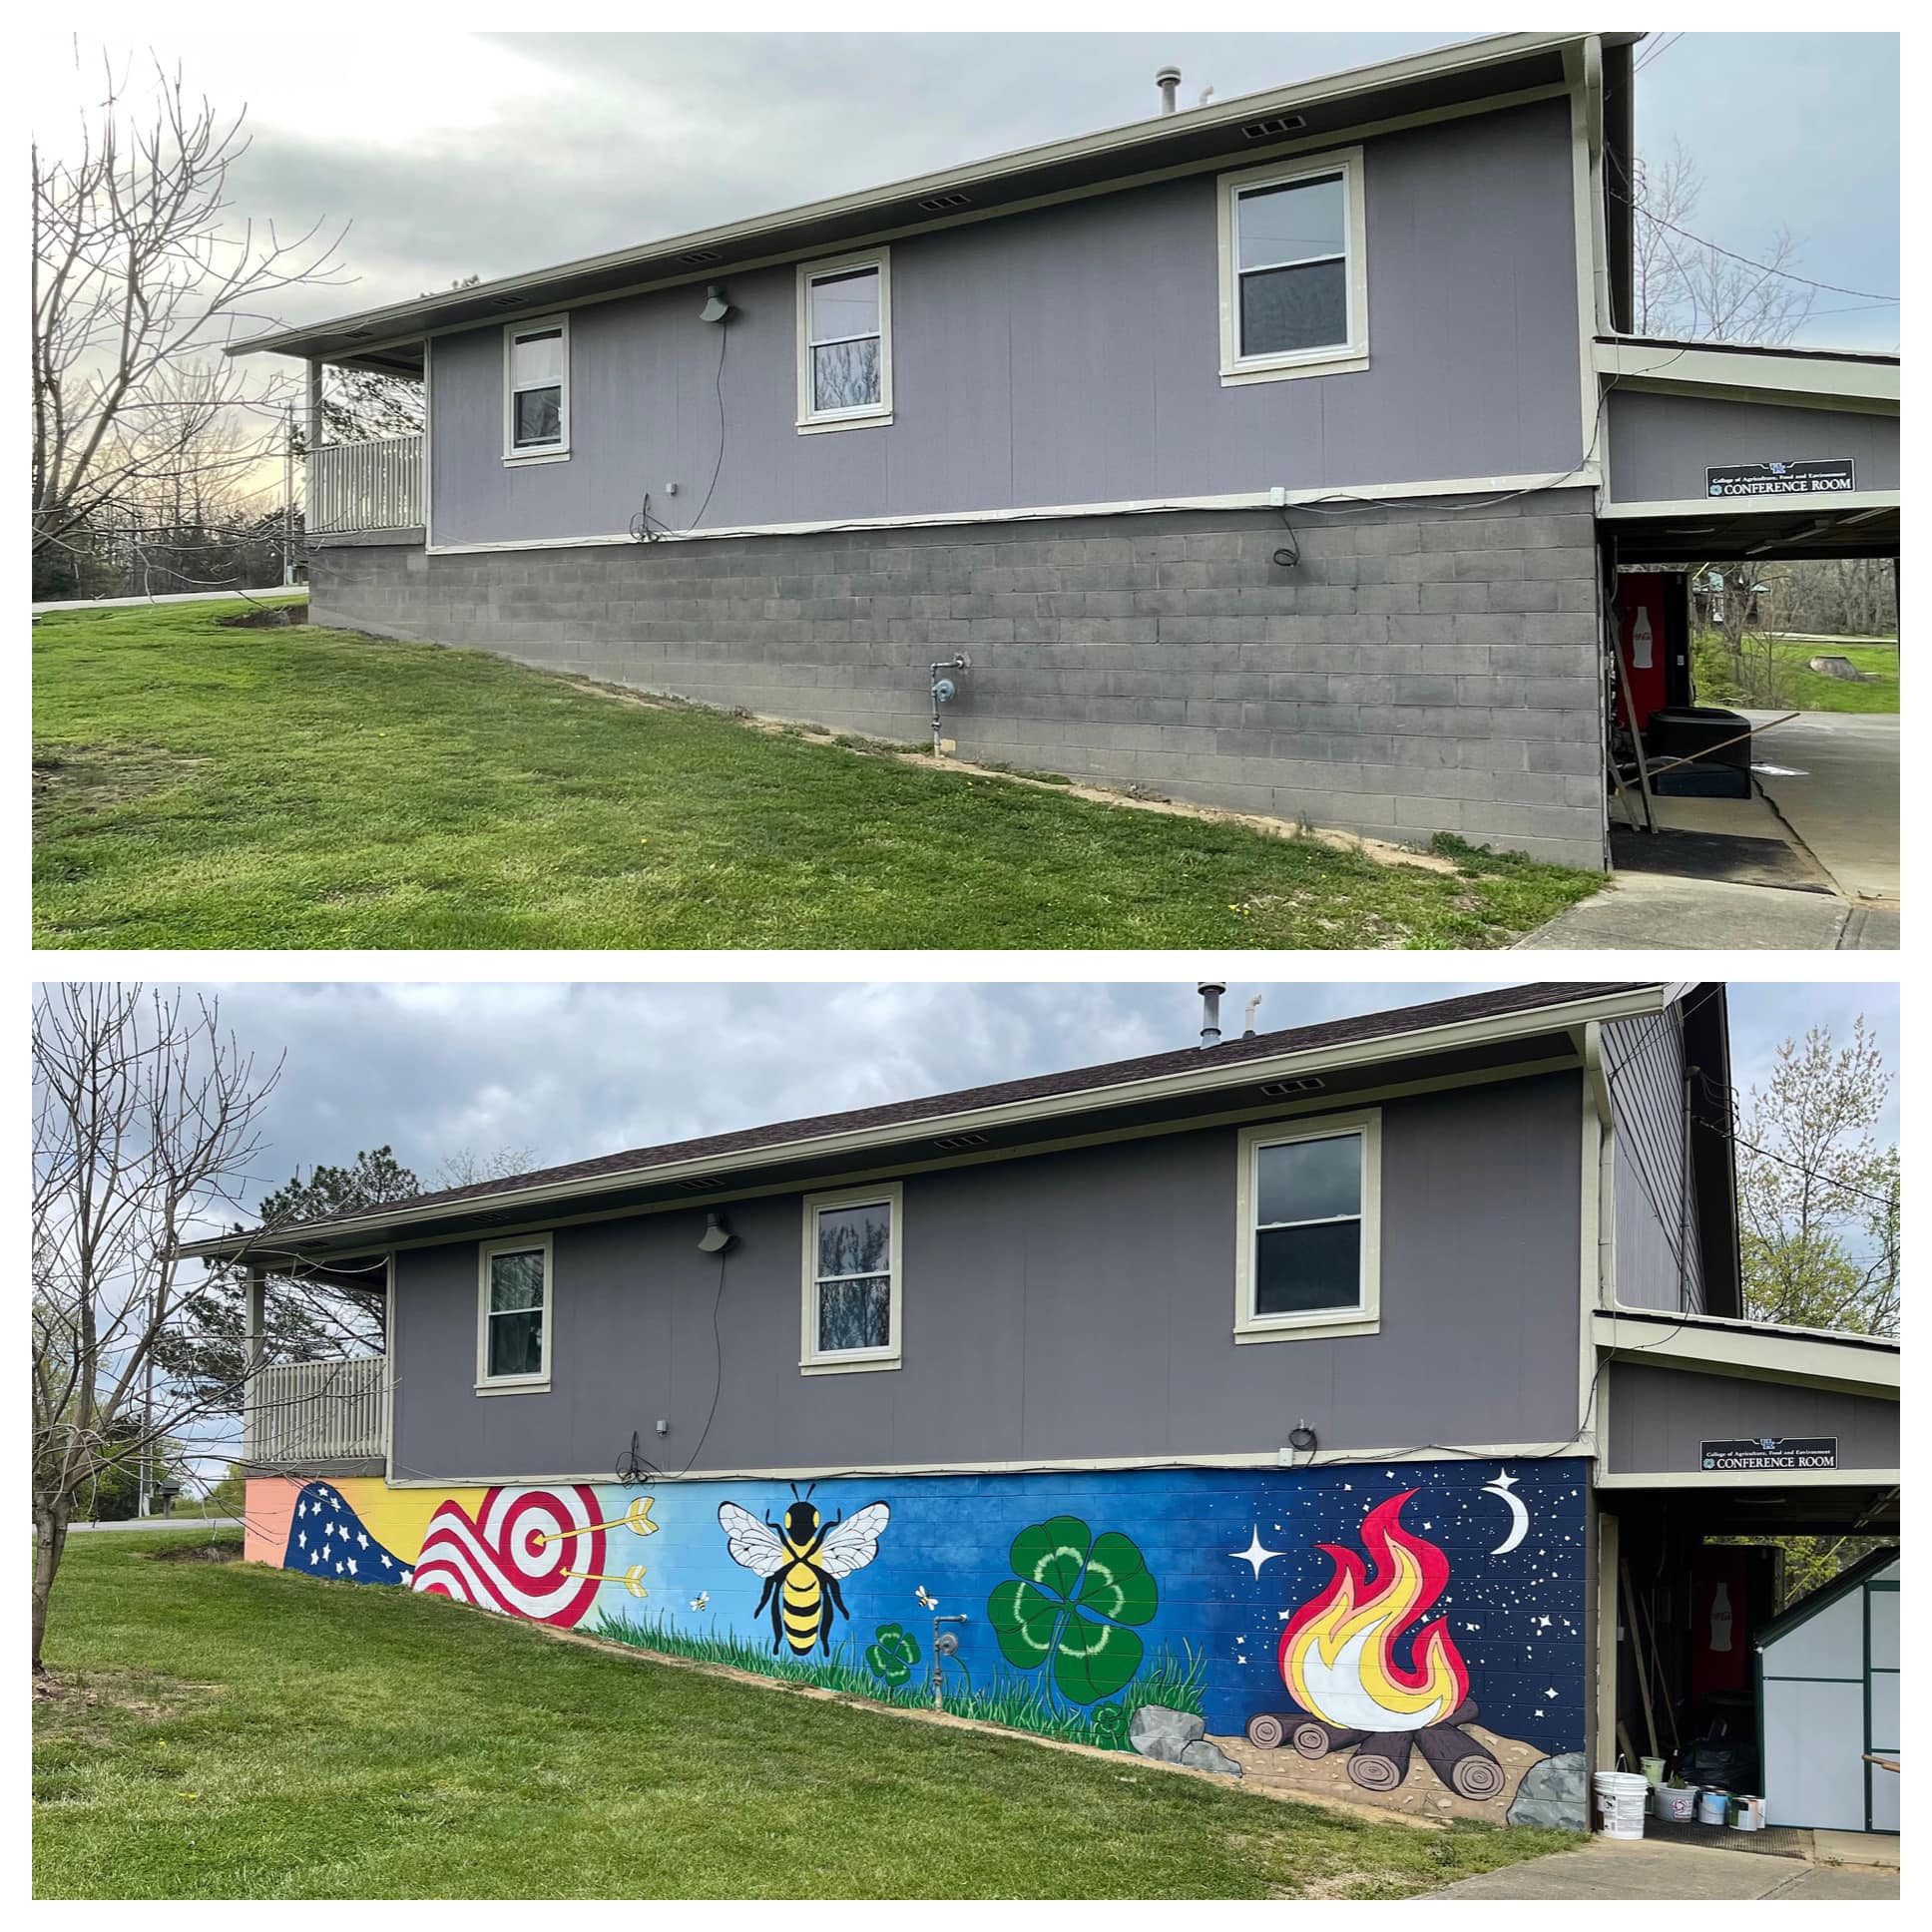 Before and after North Camp Mural picture.